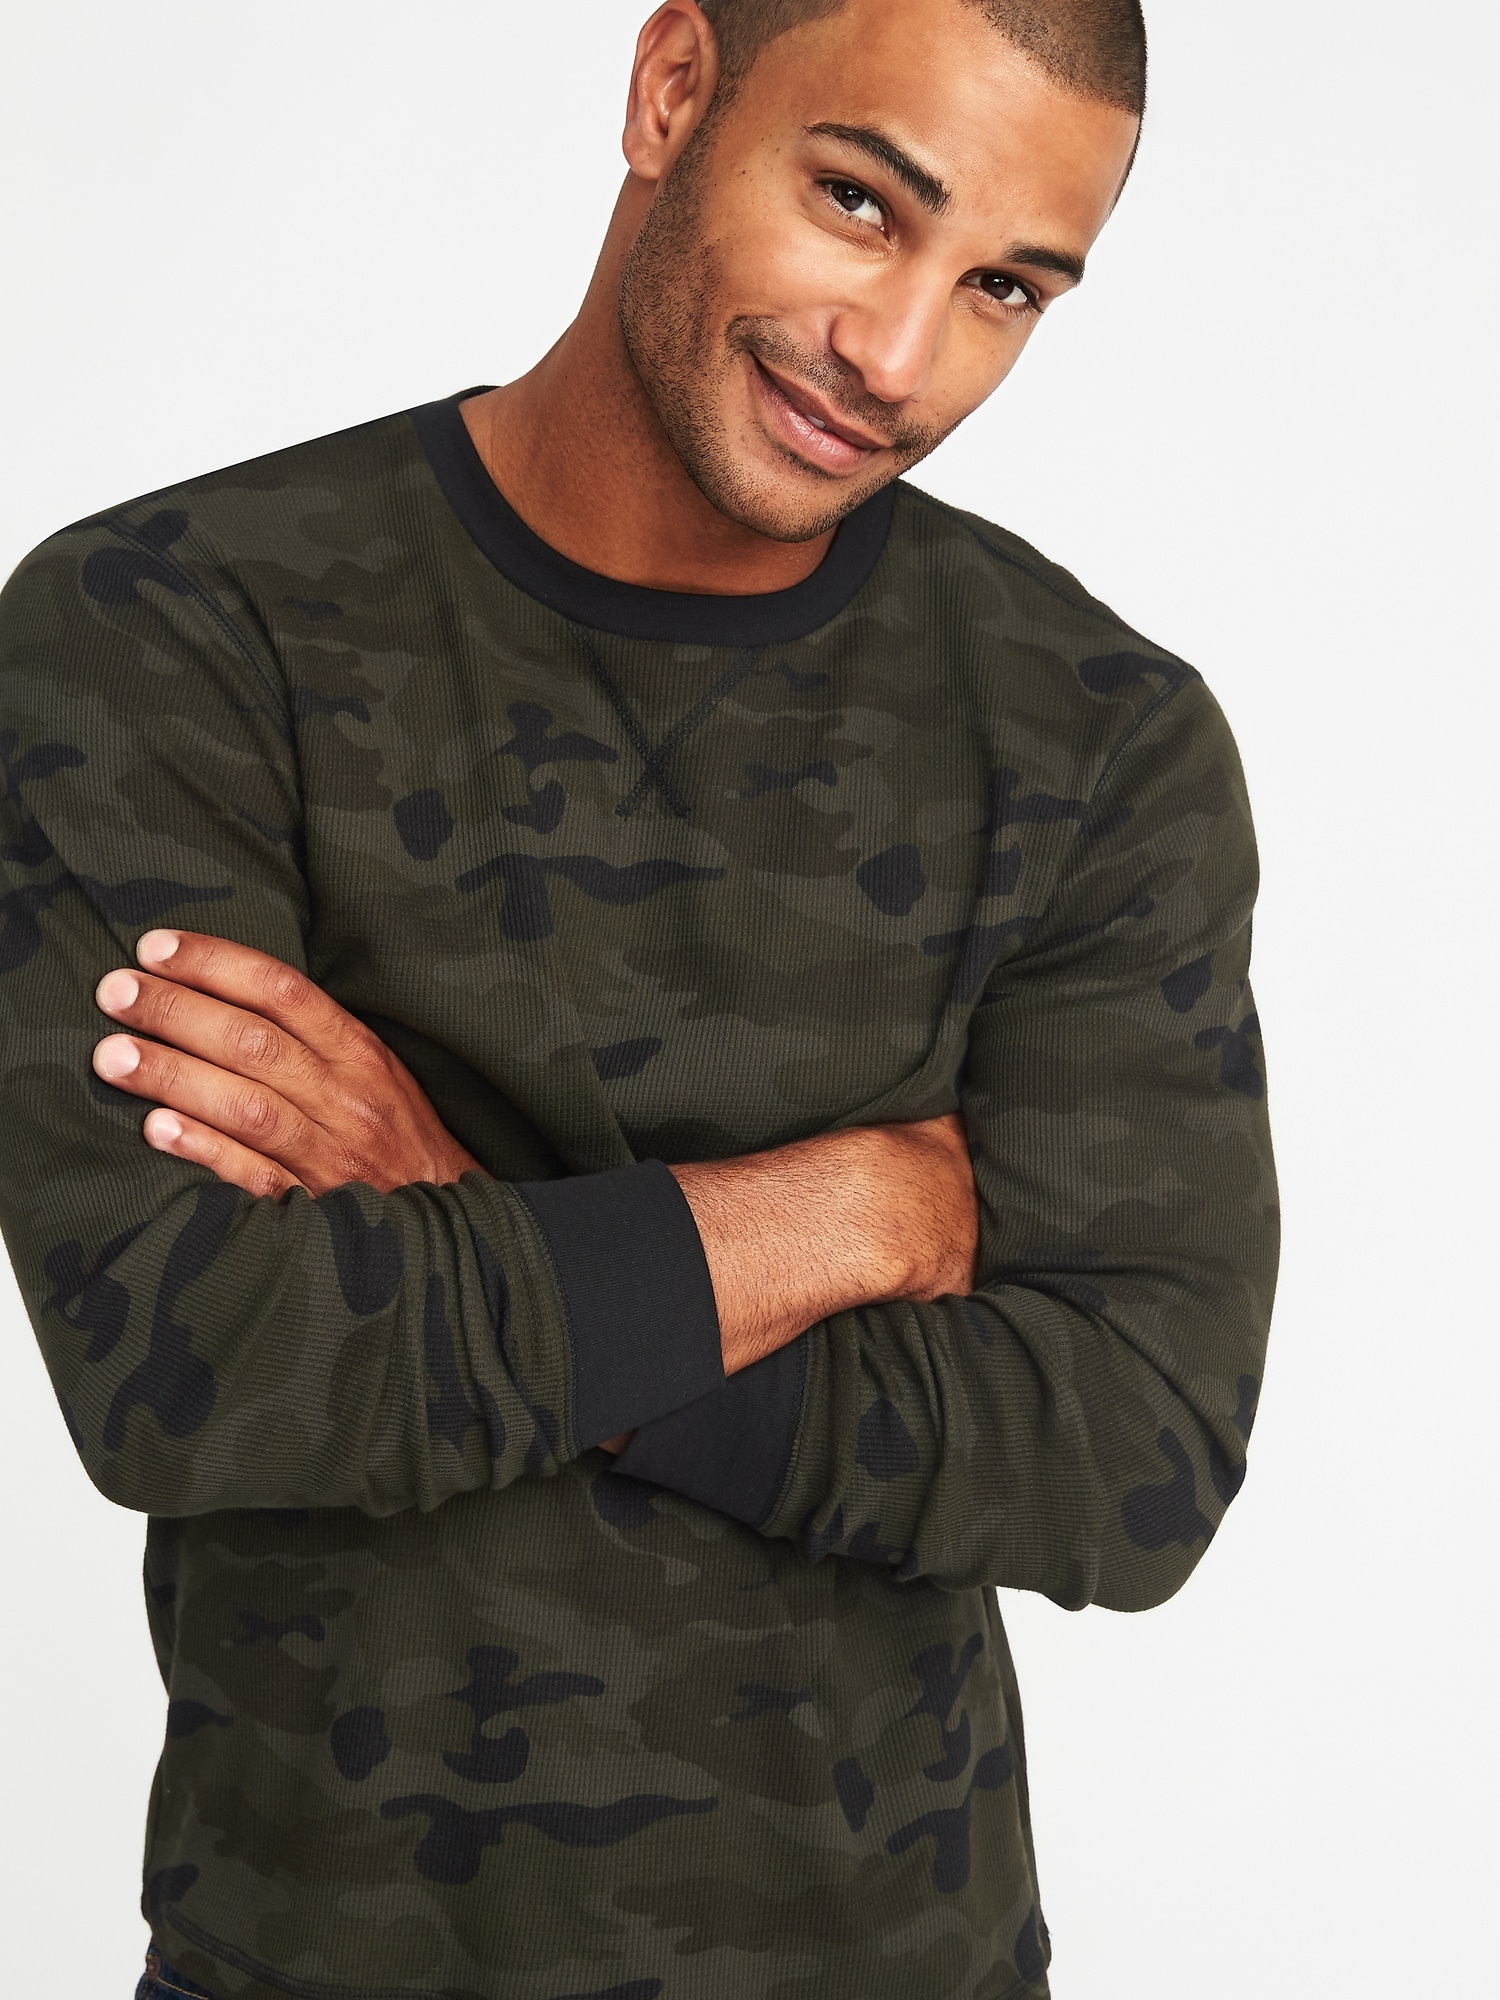 Camo Thermal-Knit Long-Sleeve Tee for Men